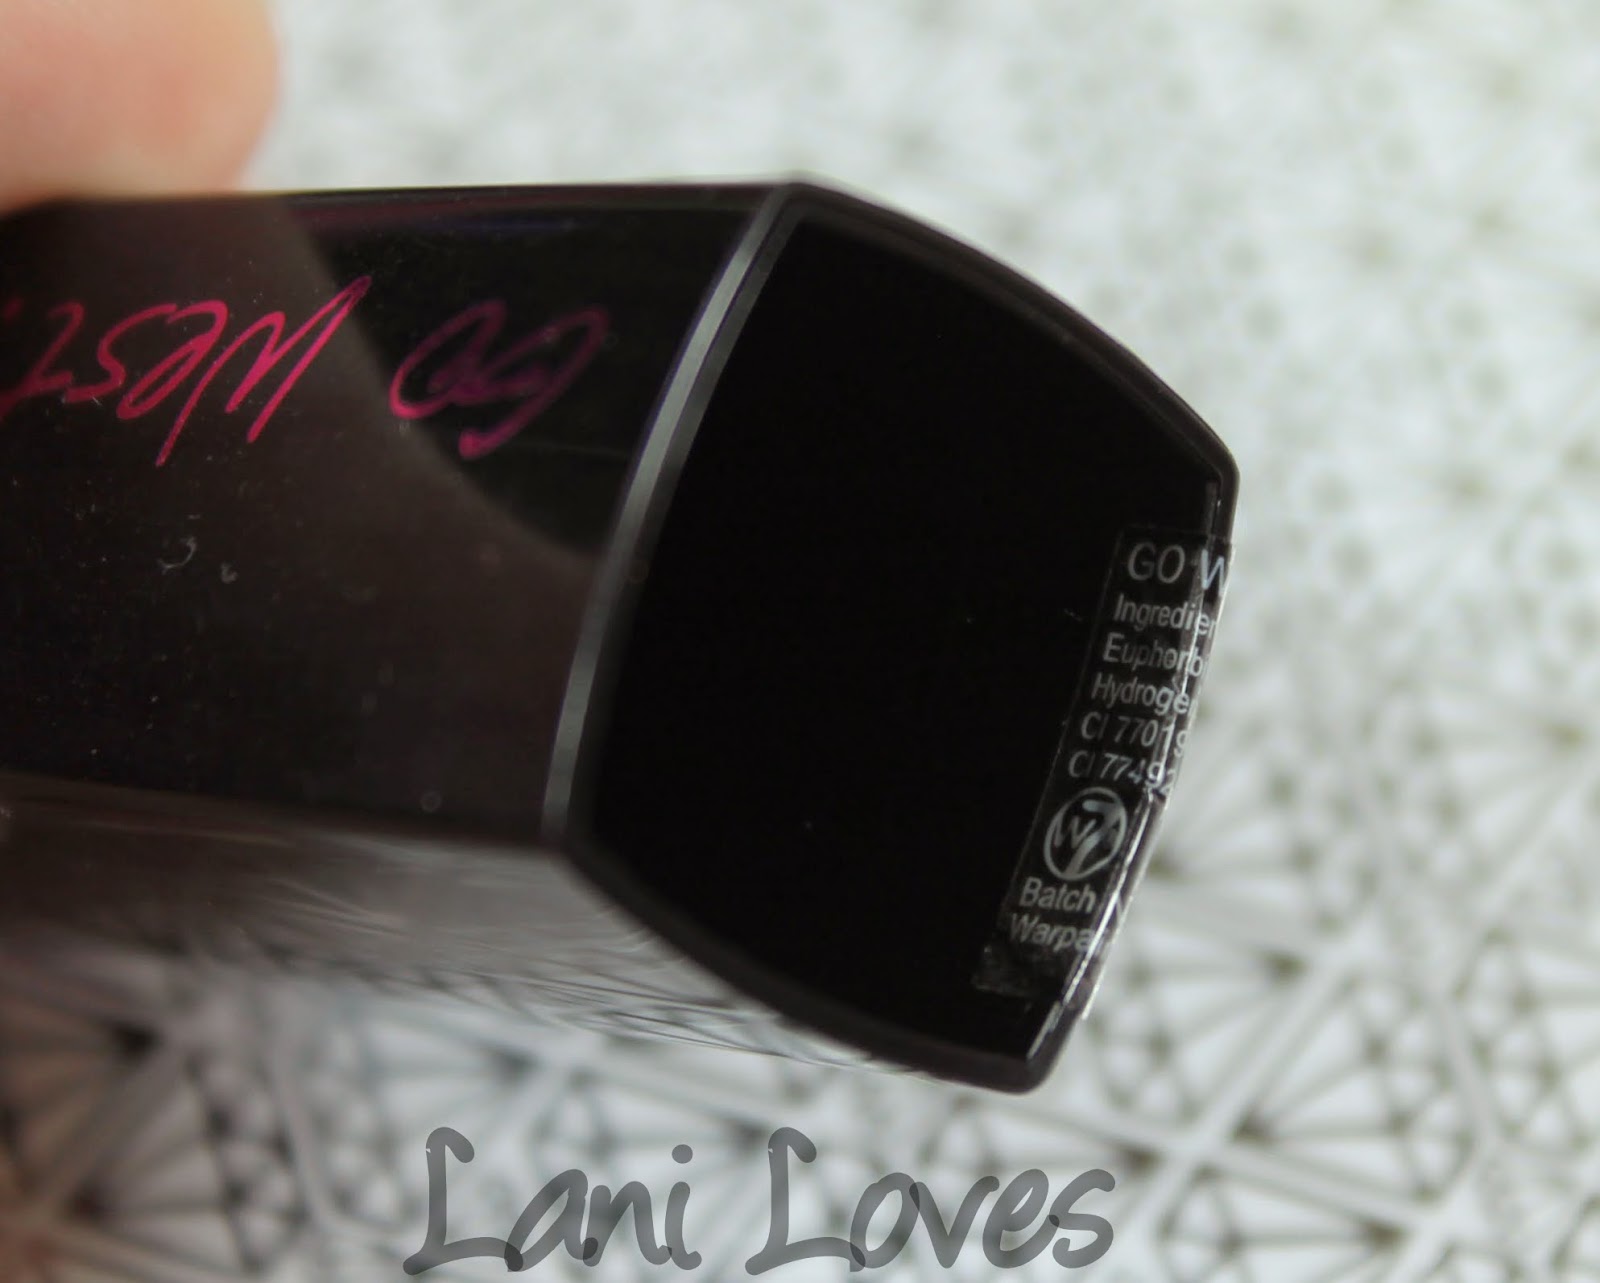 W7 Go West! Matte & West End Girls Lipstick - Pink Candy, Powder Pink, Perfect Pink & Impulse Buy Swatches & Review